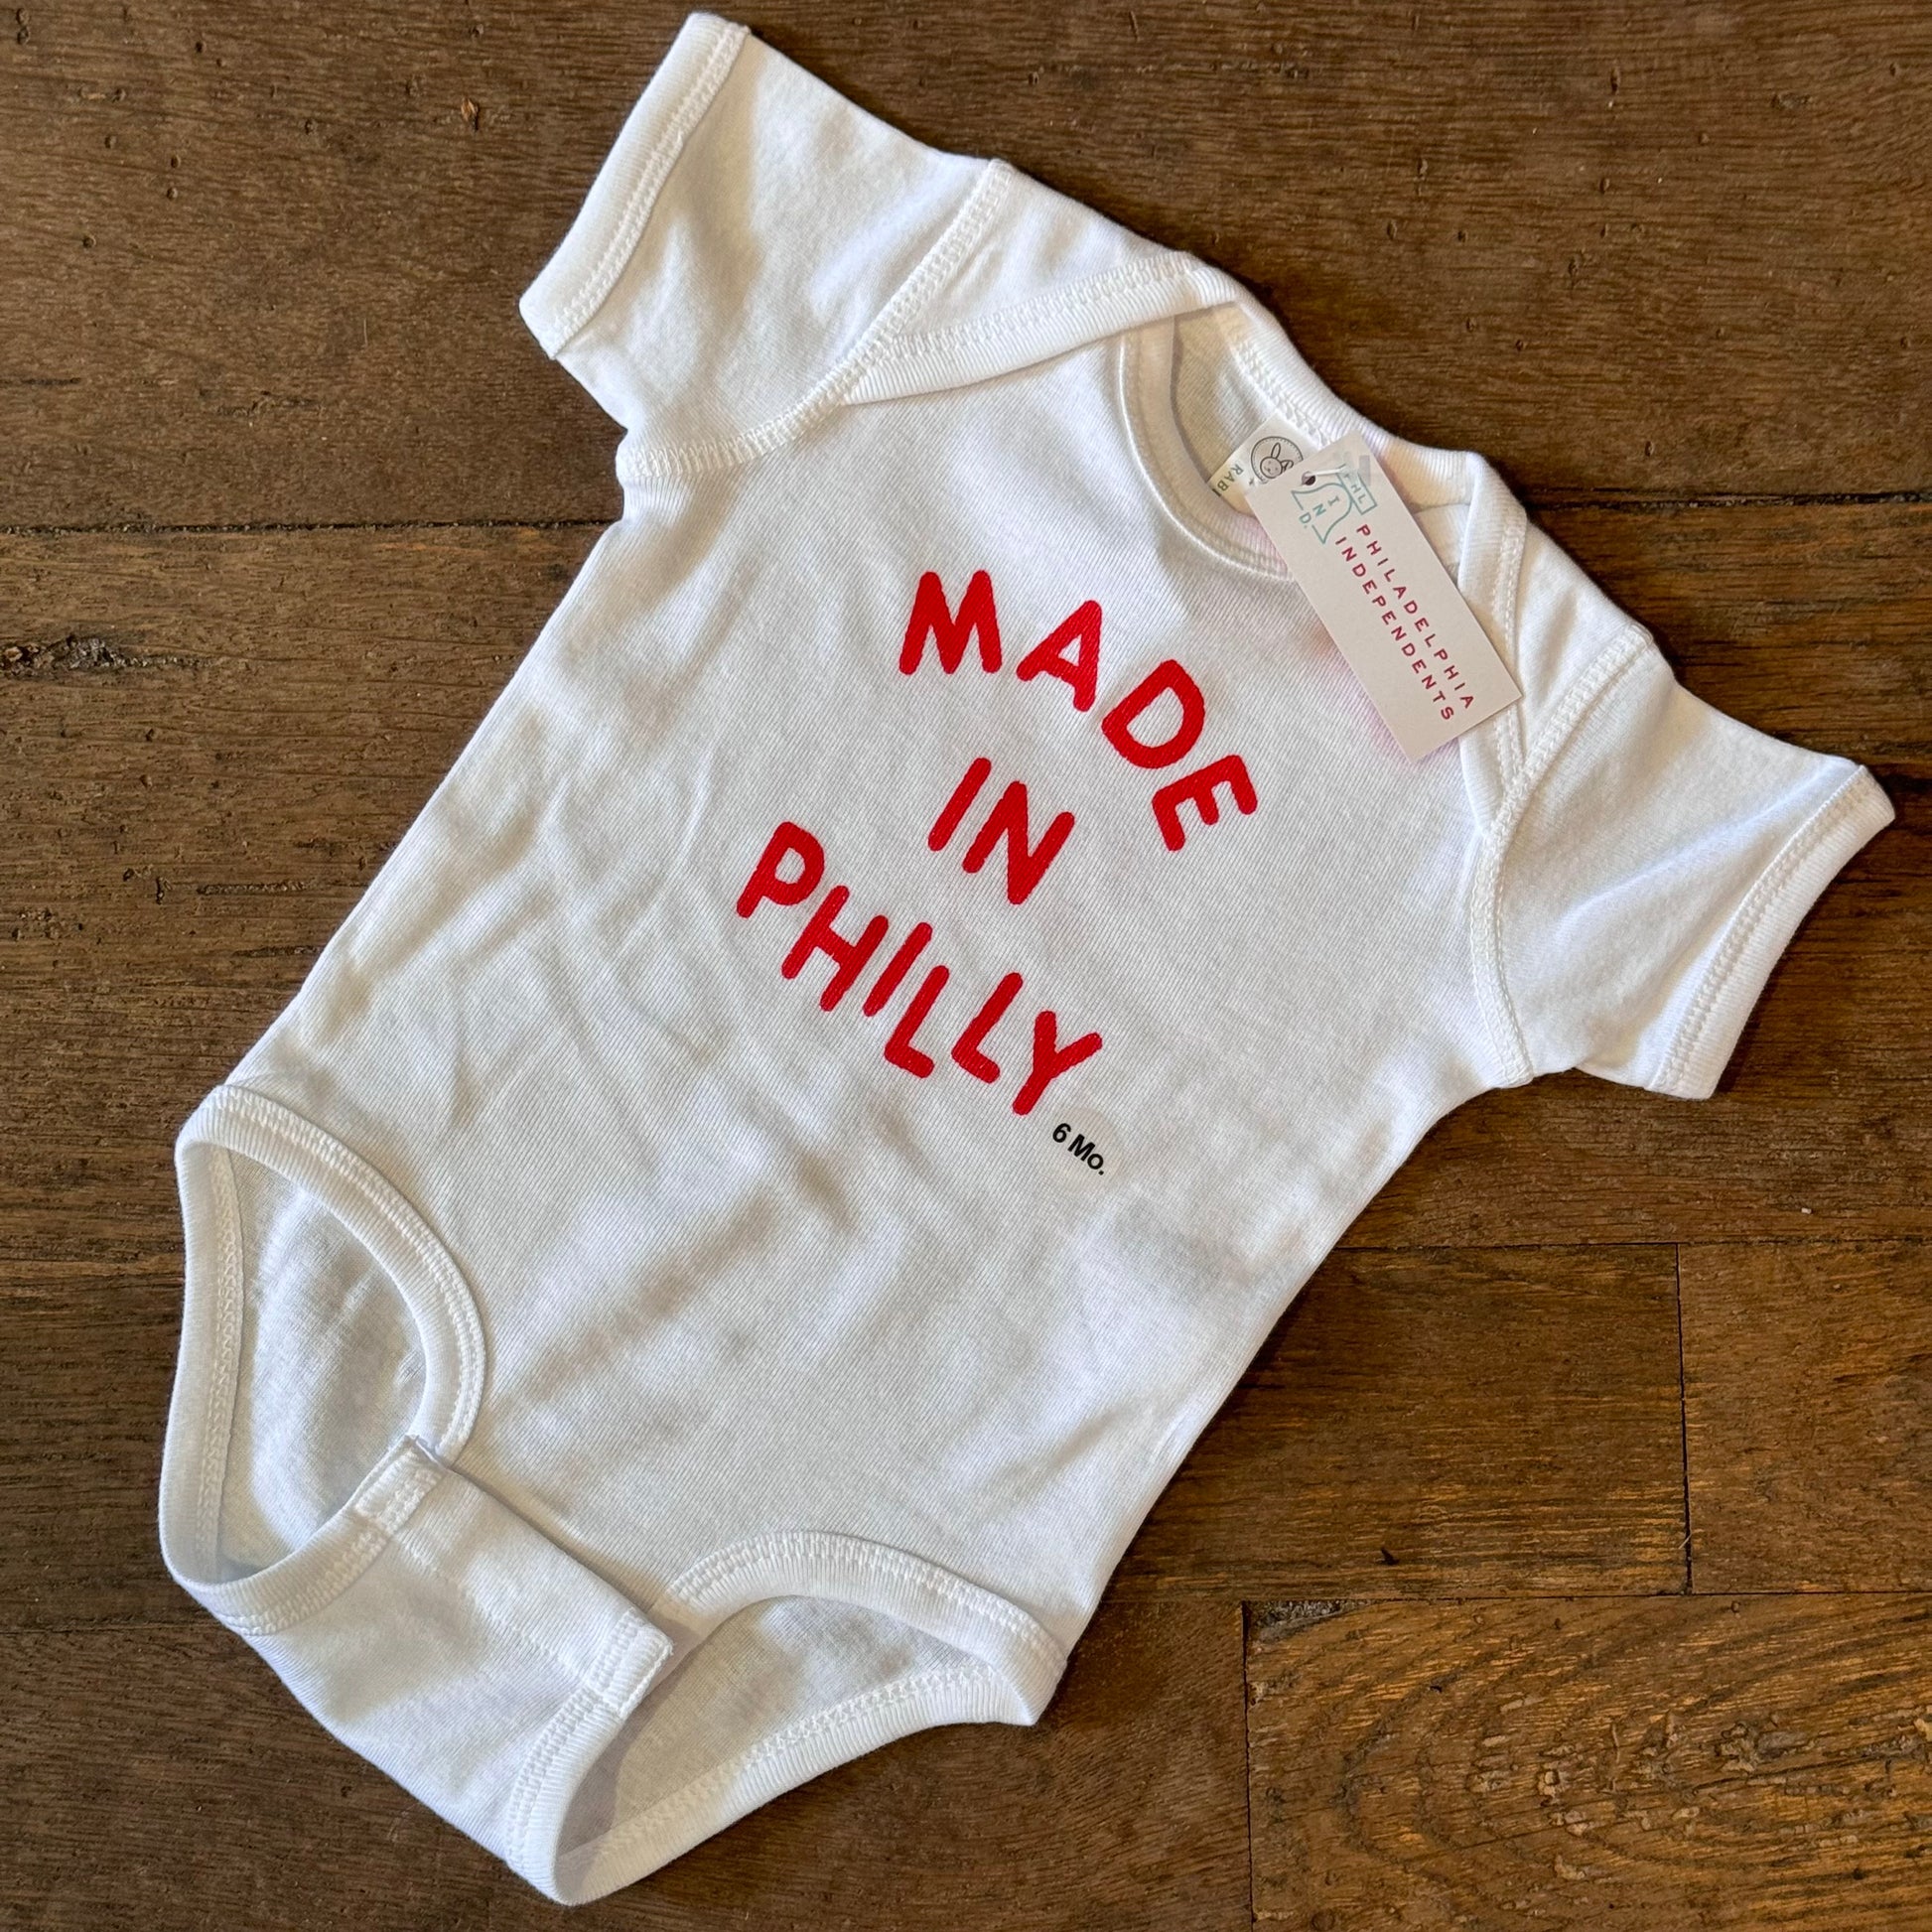 A white baby onesie made of 100% cotton with the Philadelphia Independents Made in Philly Baby Onesie in red letters, displayed on a wooden surface.